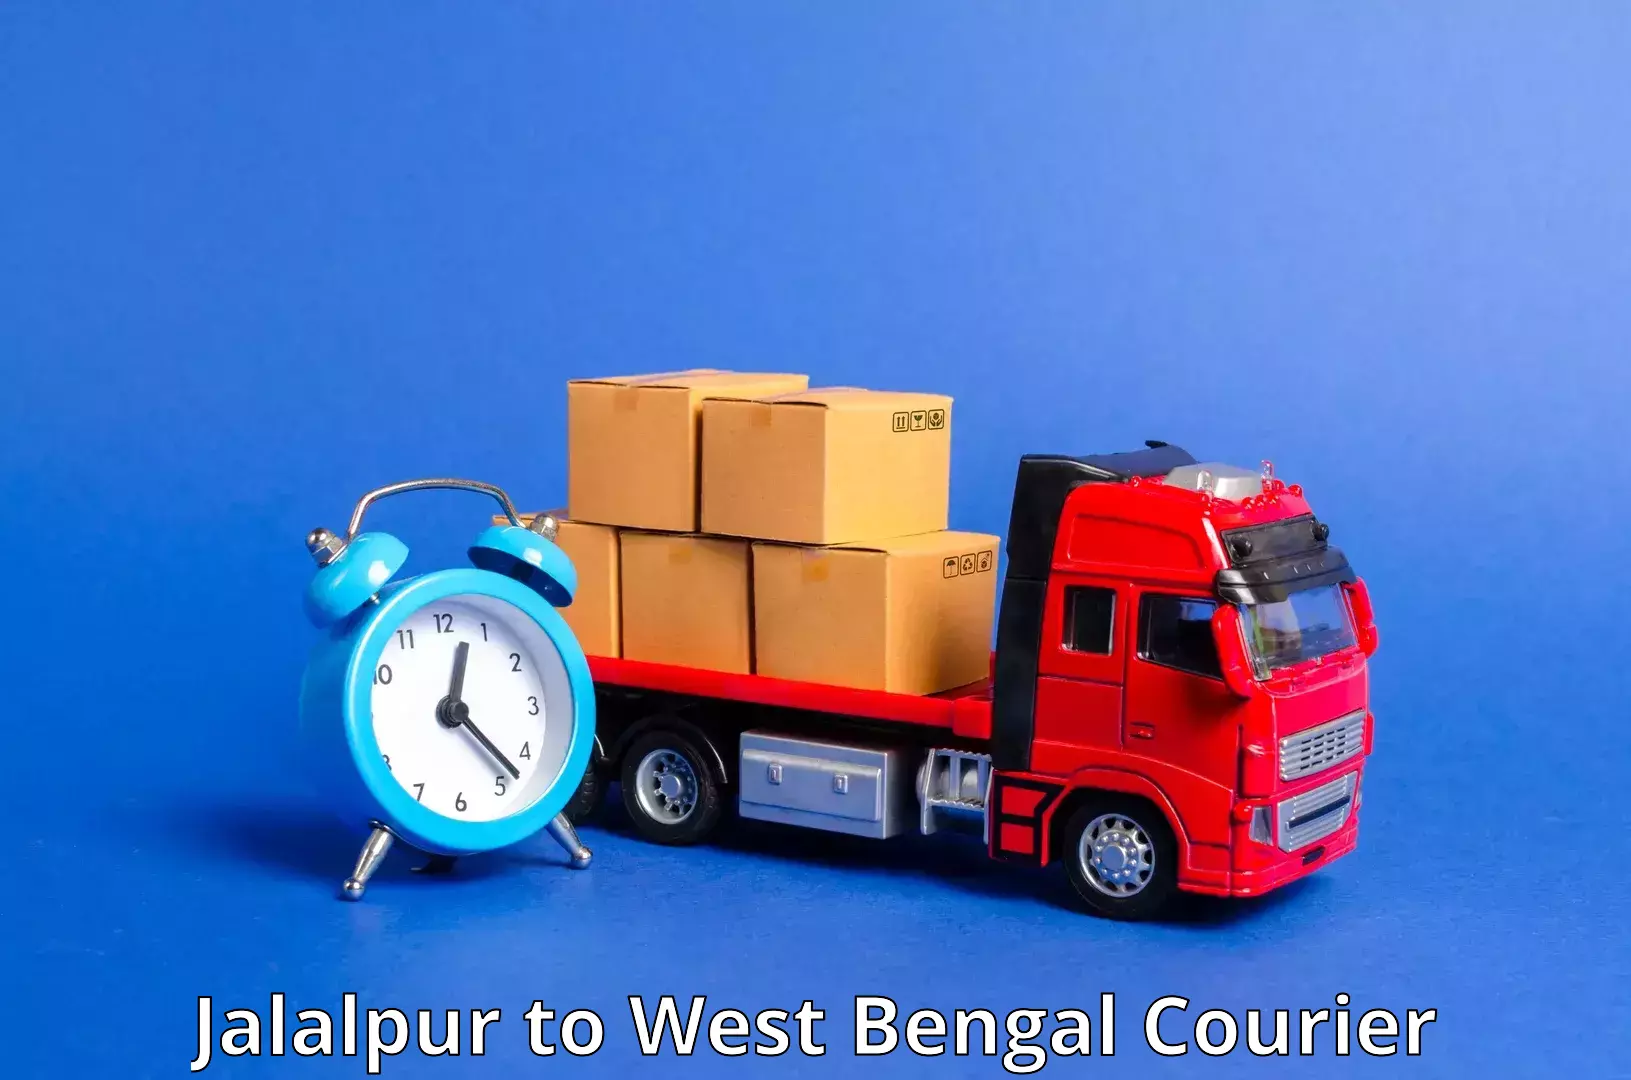 Air courier services in Jalalpur to Baneswar